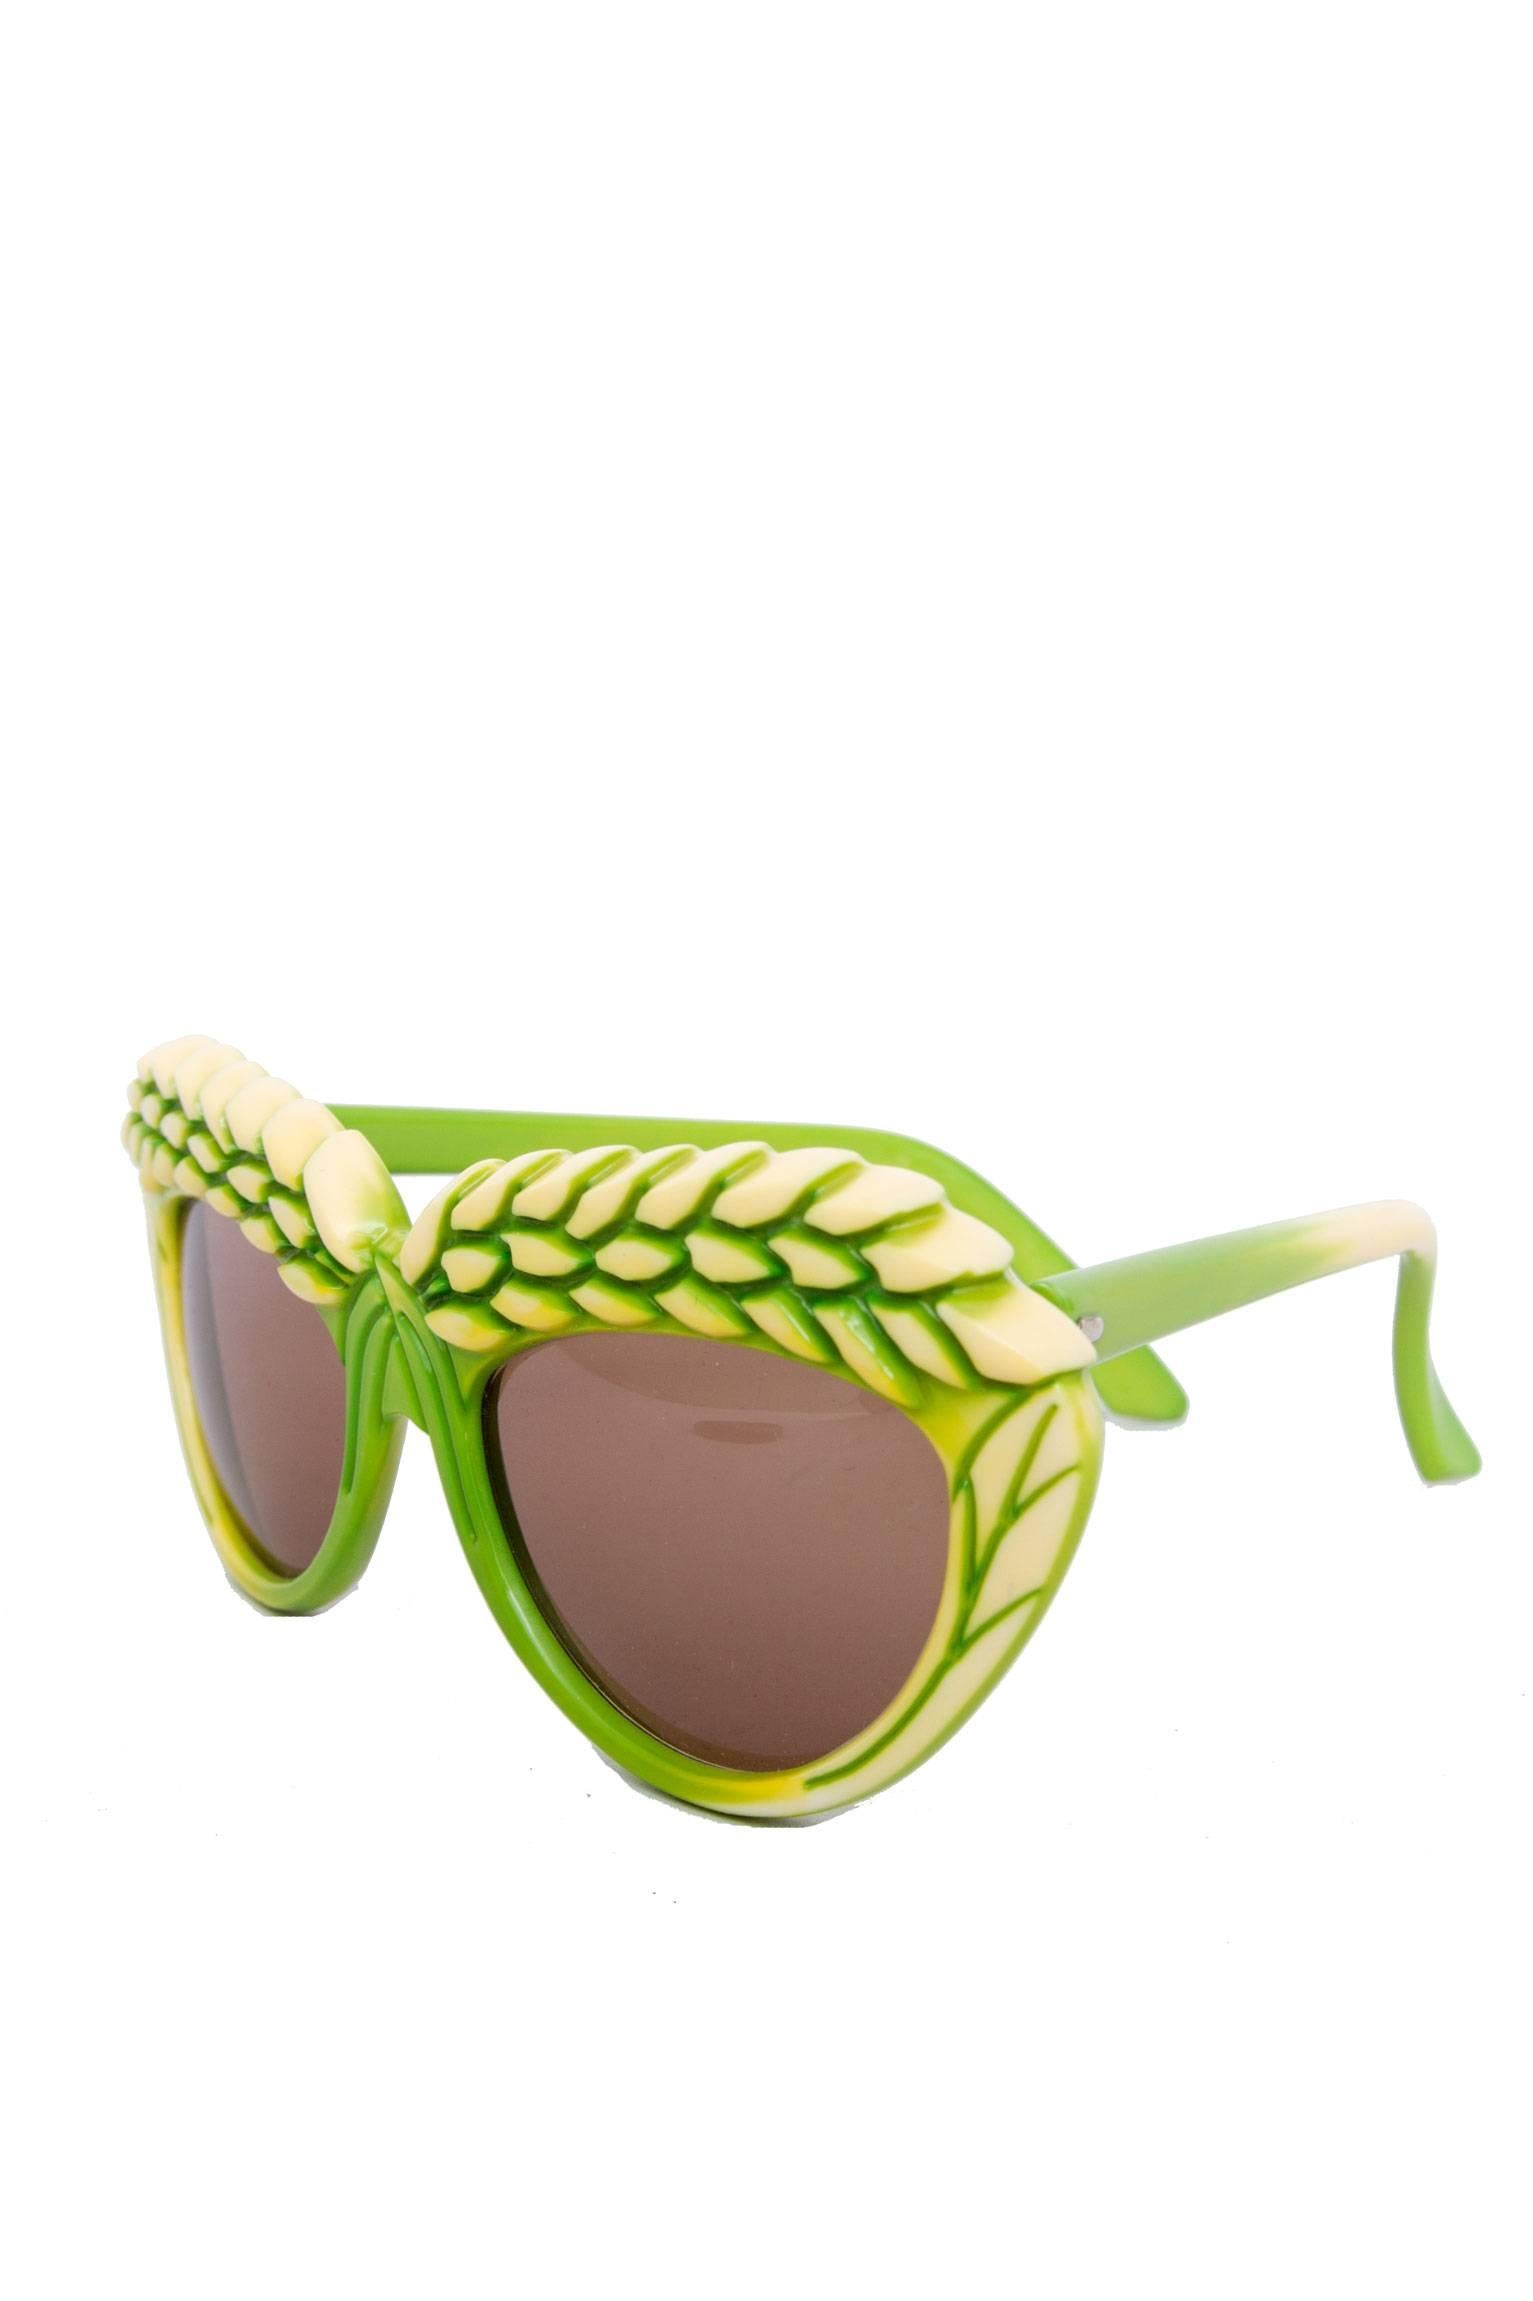 A rare, bright pair of 1980s green Isabel Canovas sunglasses with brown tinted lenses  and a detailed frame, where two yellow barley heads stretch across each lens. 

